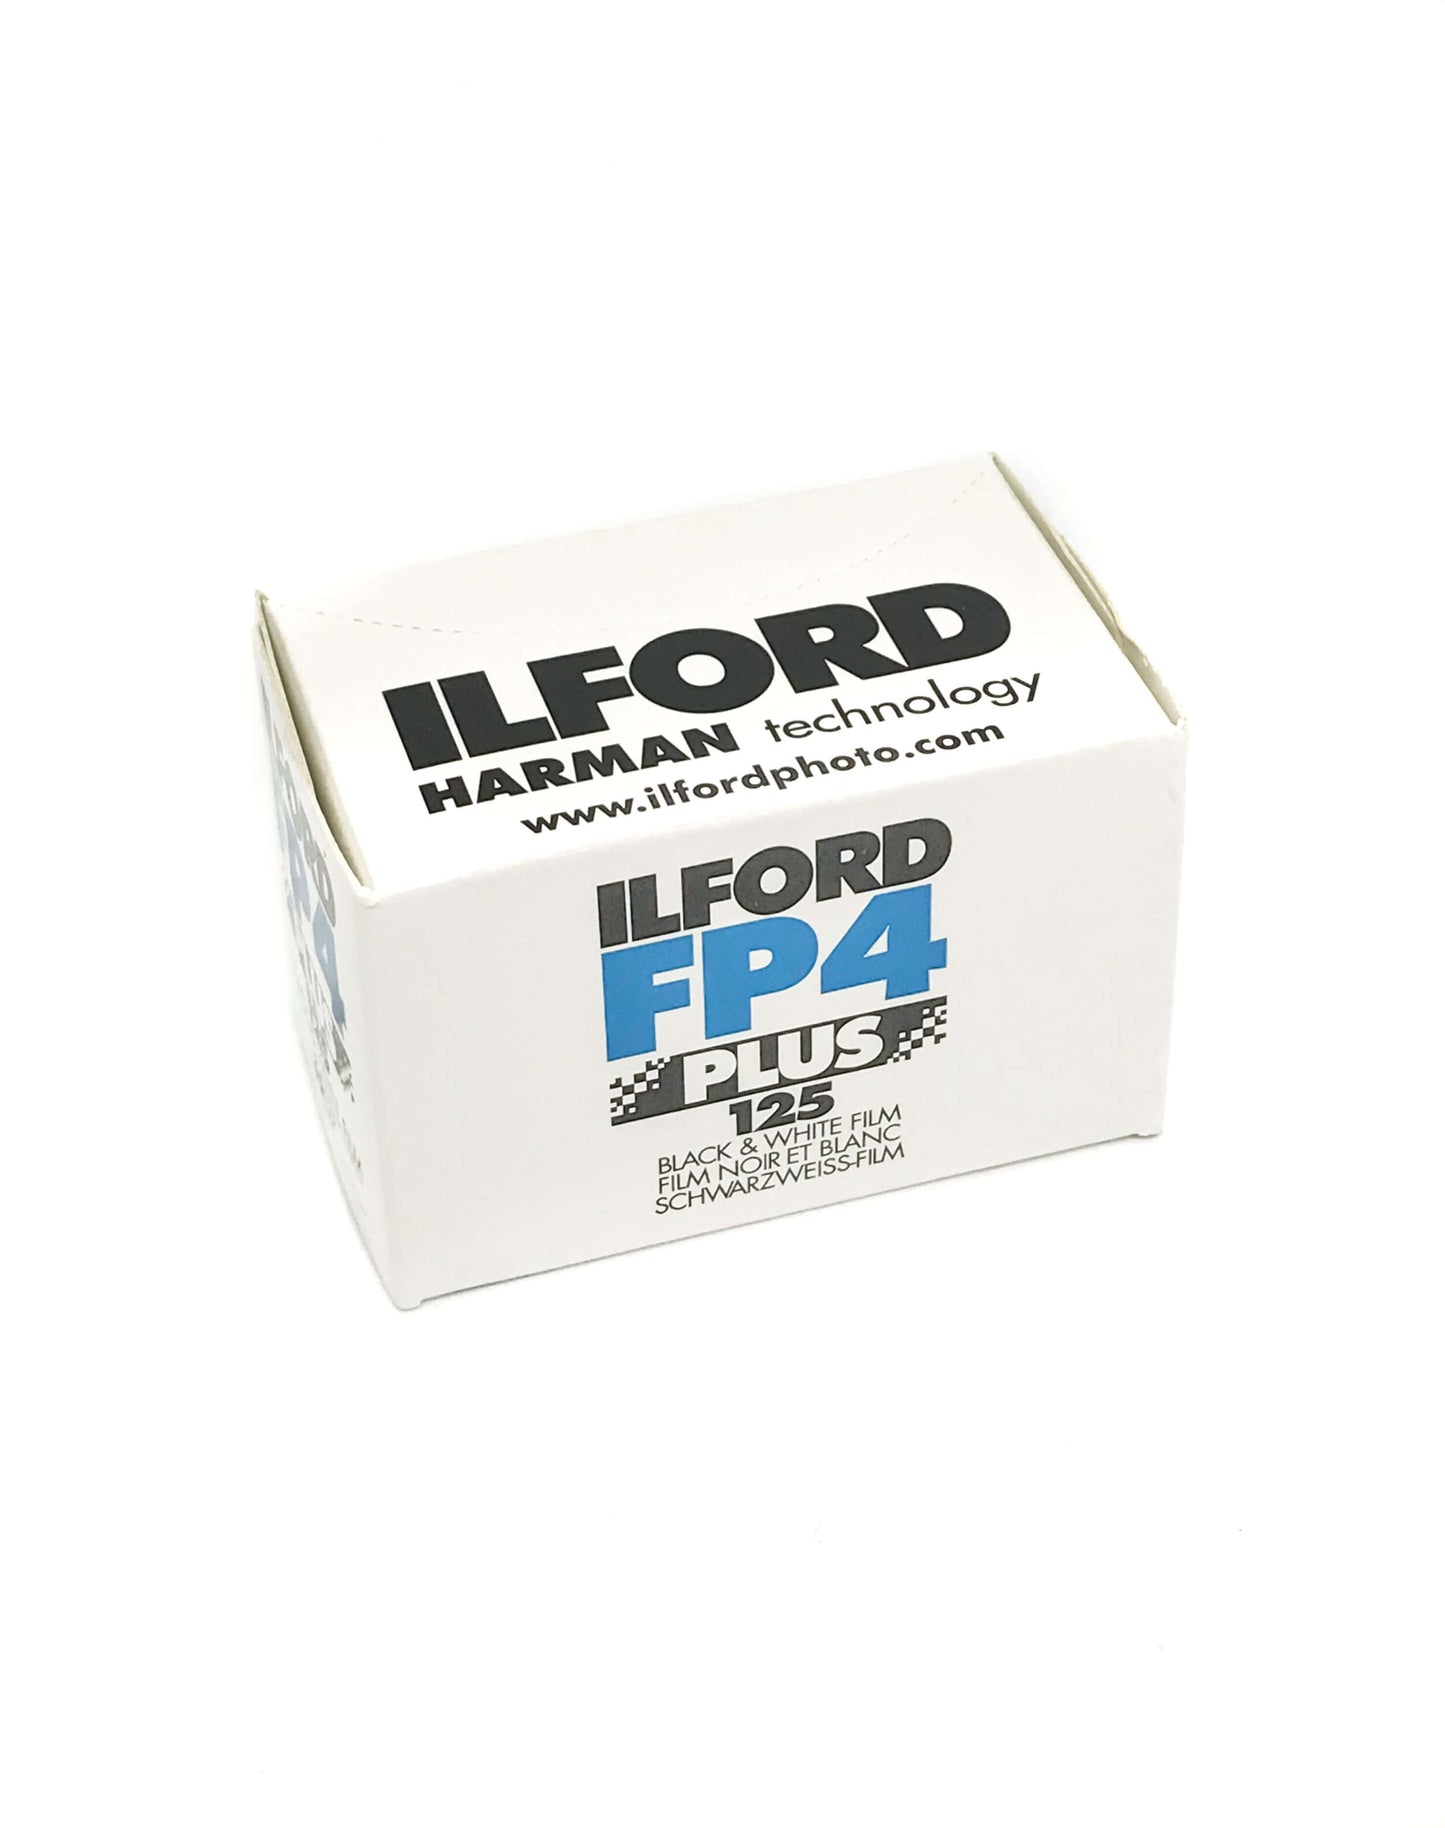 ILFORD FP4 125 Black and White 35mm Film ( 36 Exposures )